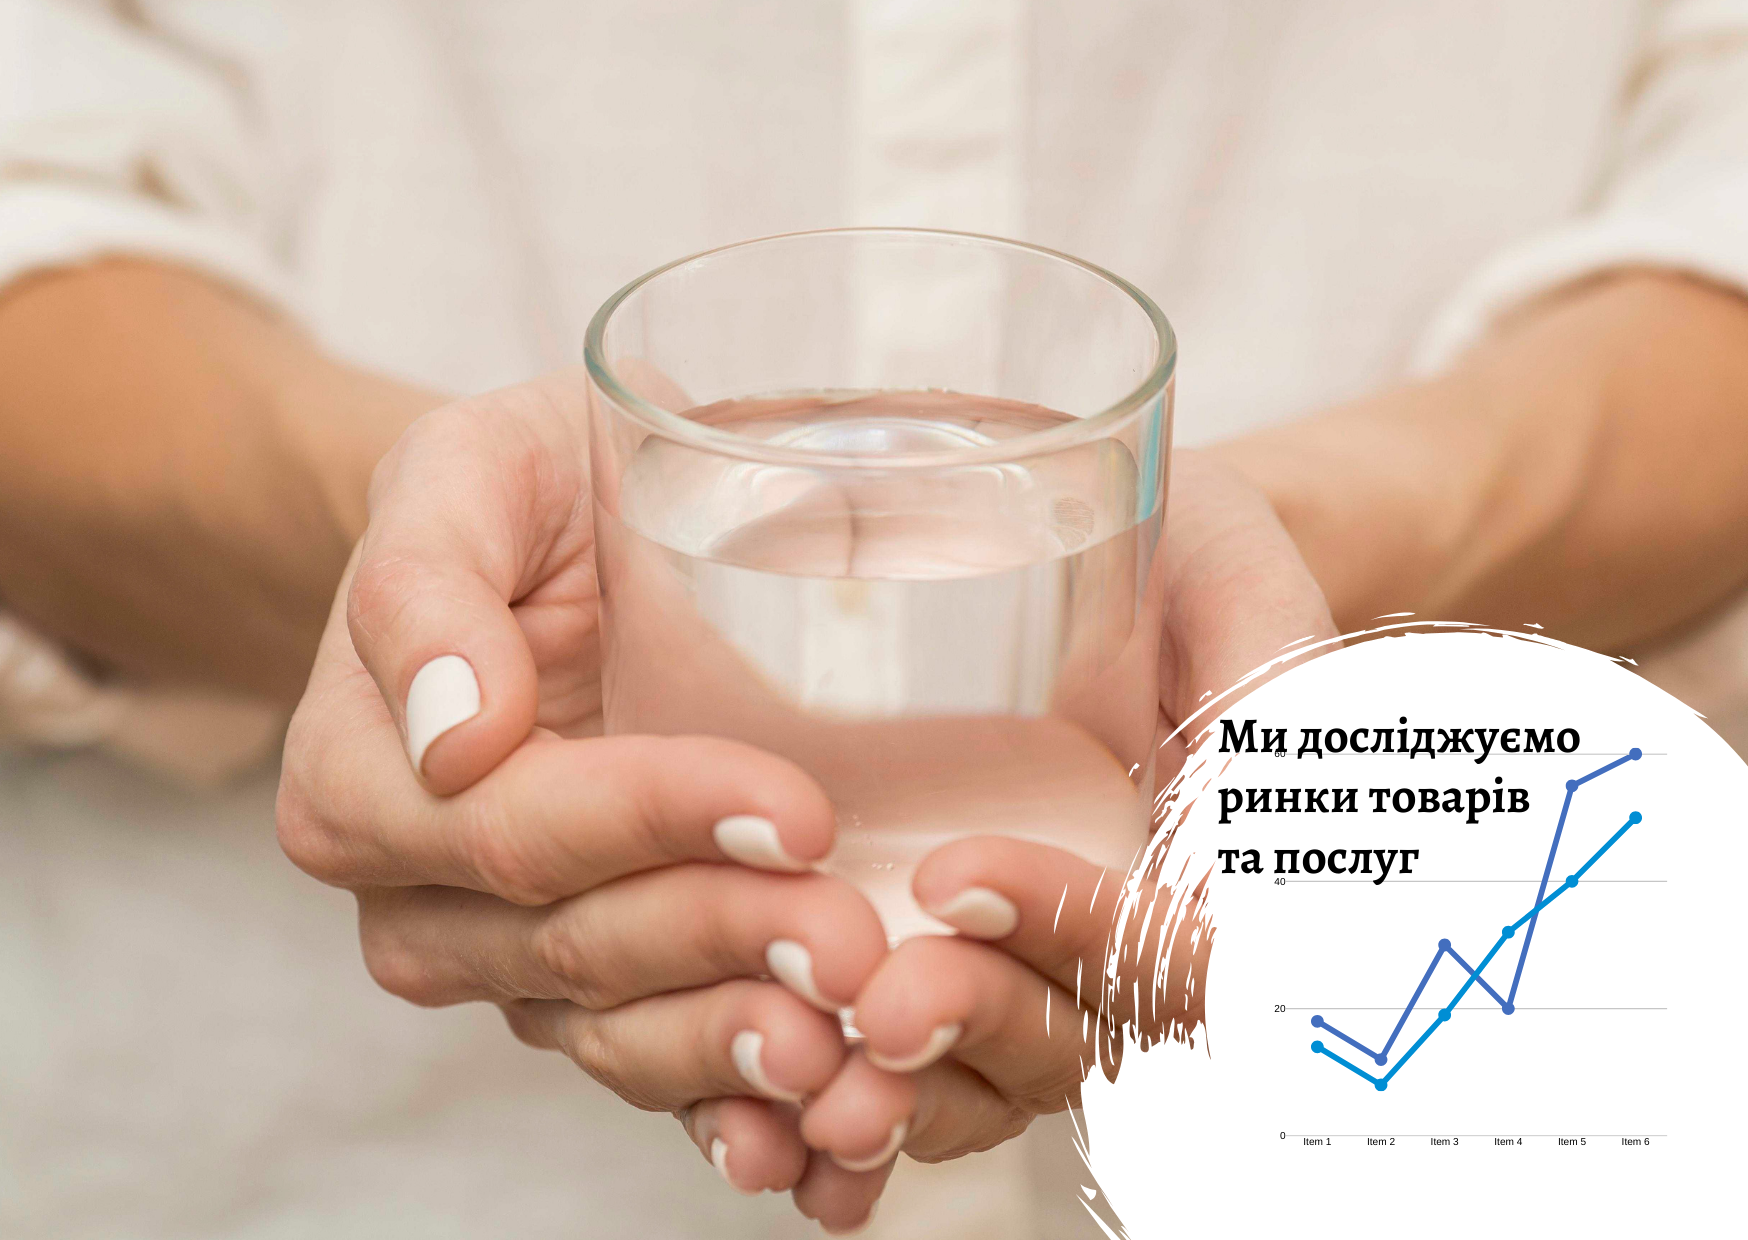 Survey of drinking water quality in Kirovograd and Mykolaiv regions